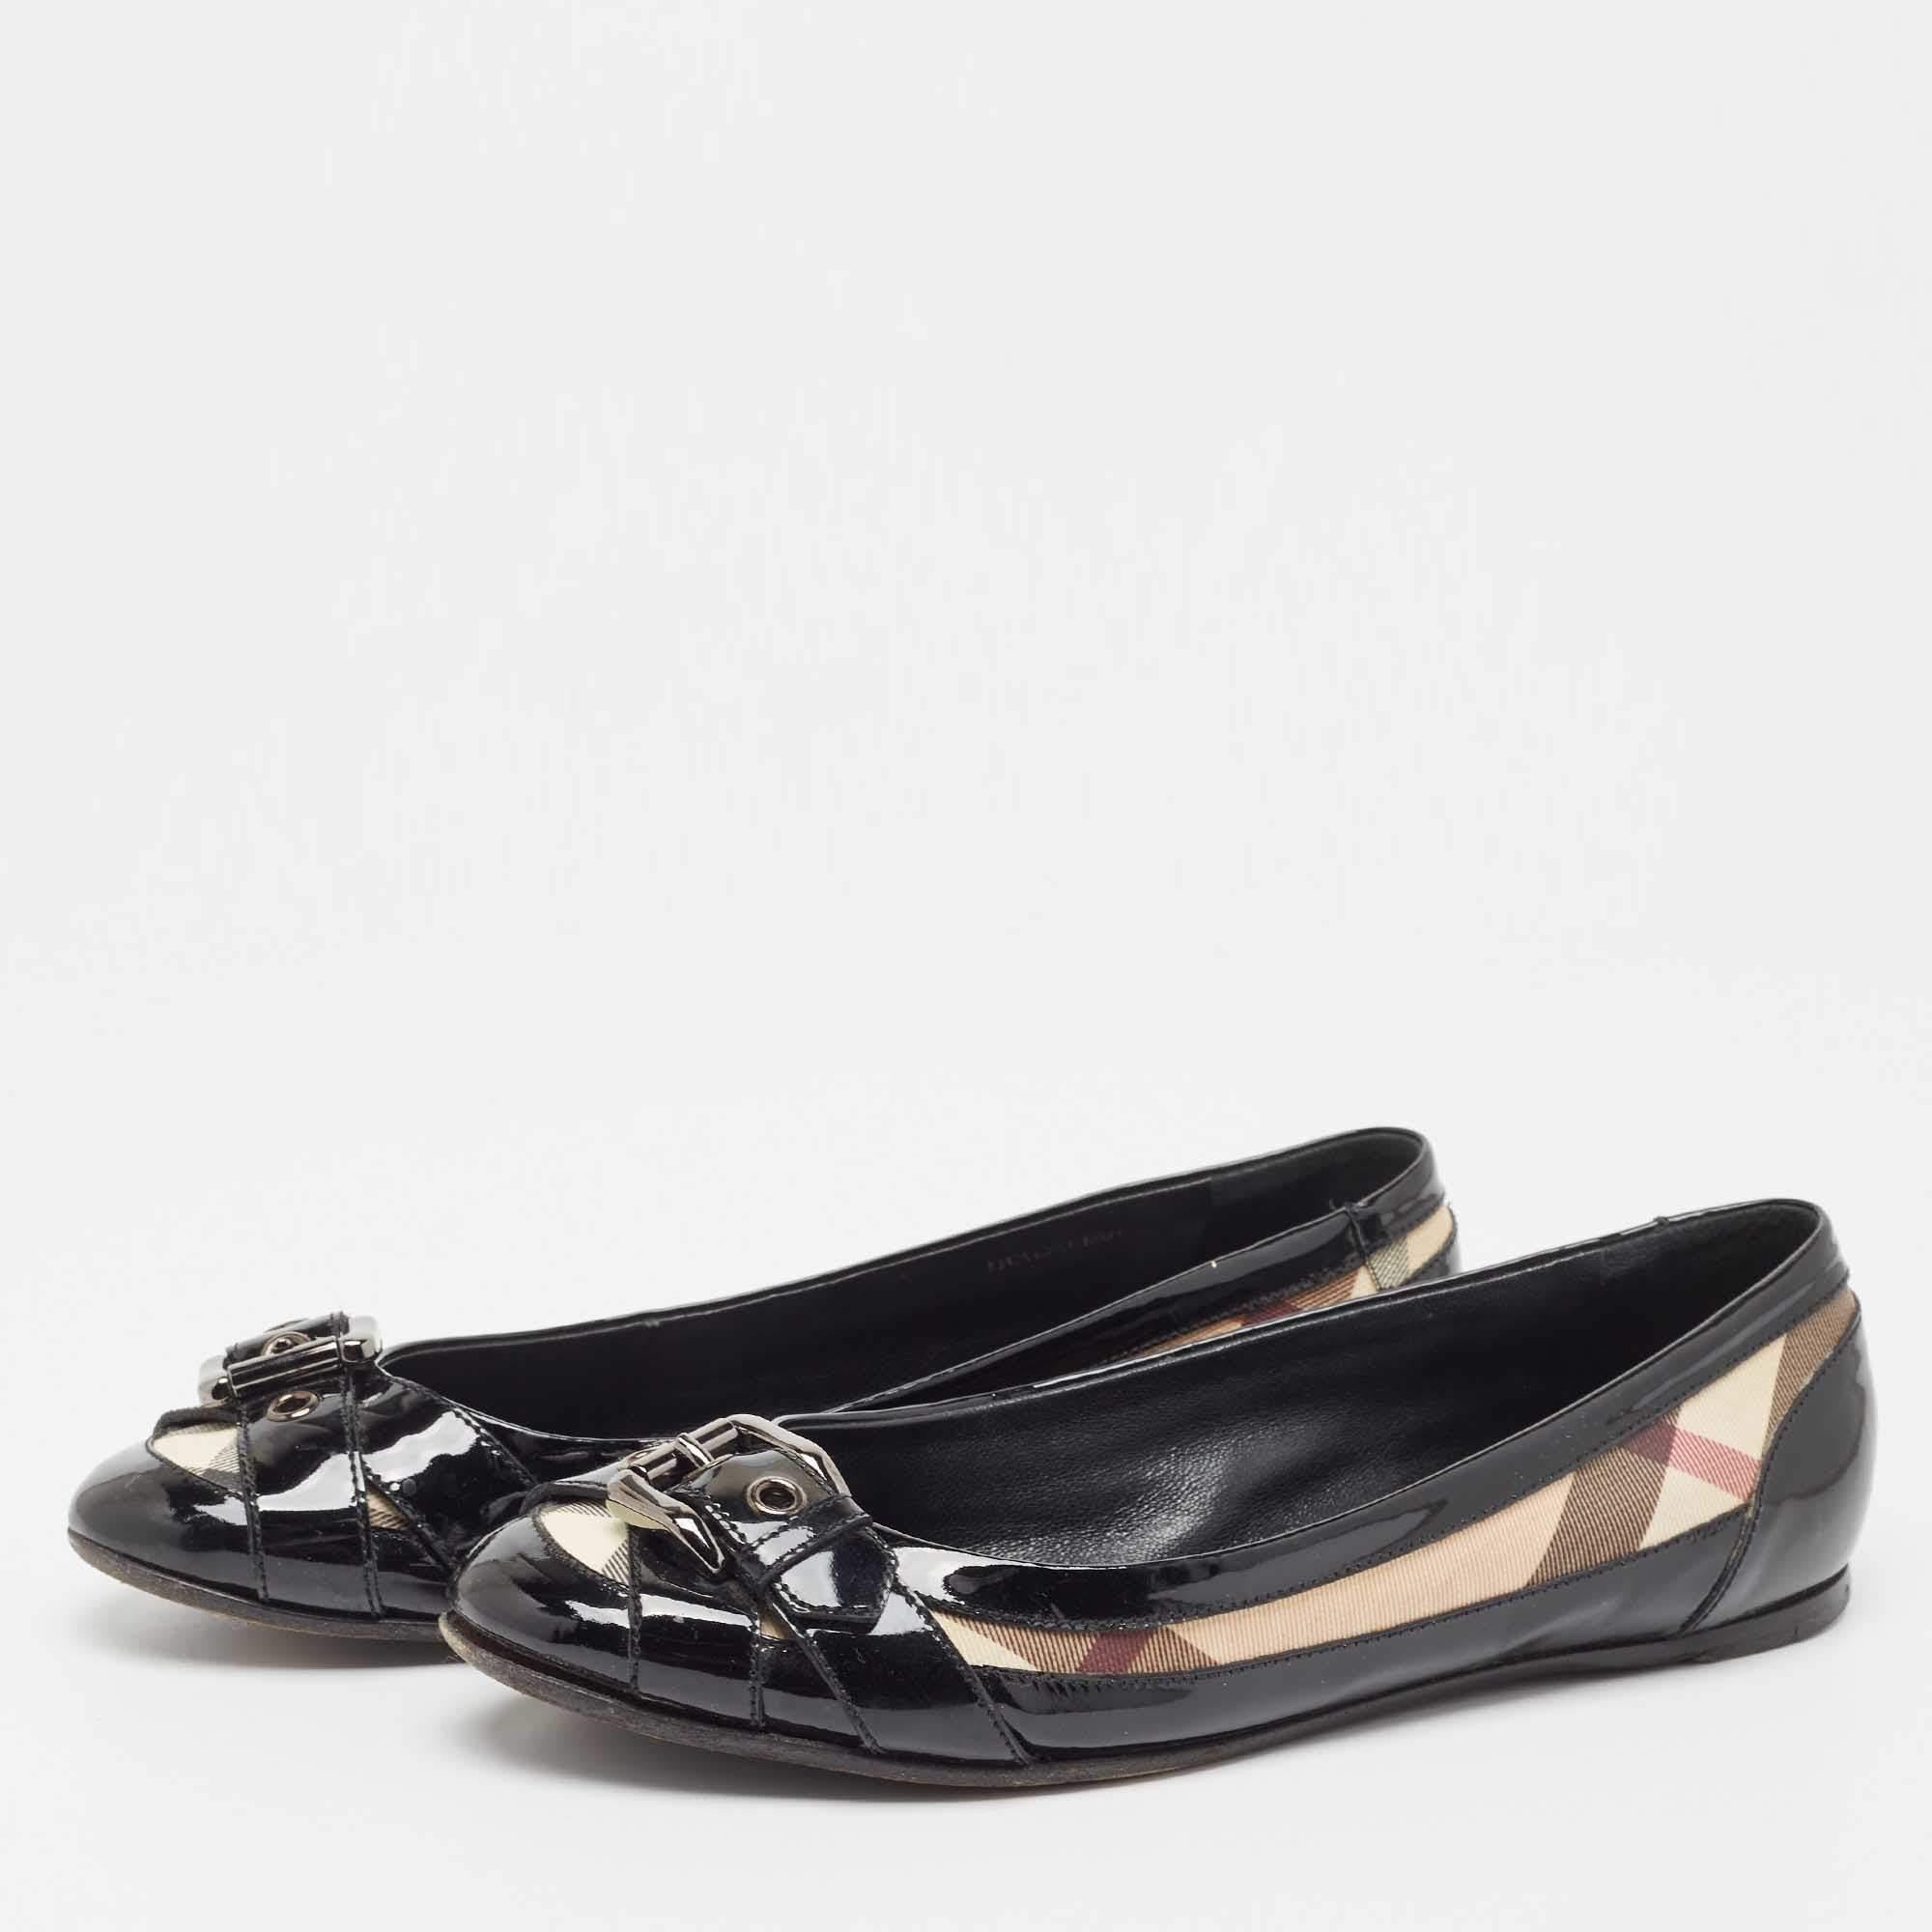 Step into sophistication and comfort with these designer flats for women. Exquisitely crafted, these shoes blend timeless elegance with everyday ease, ensuring a stylish and relaxed stride.

Includes: Original Dustbag, Original Box